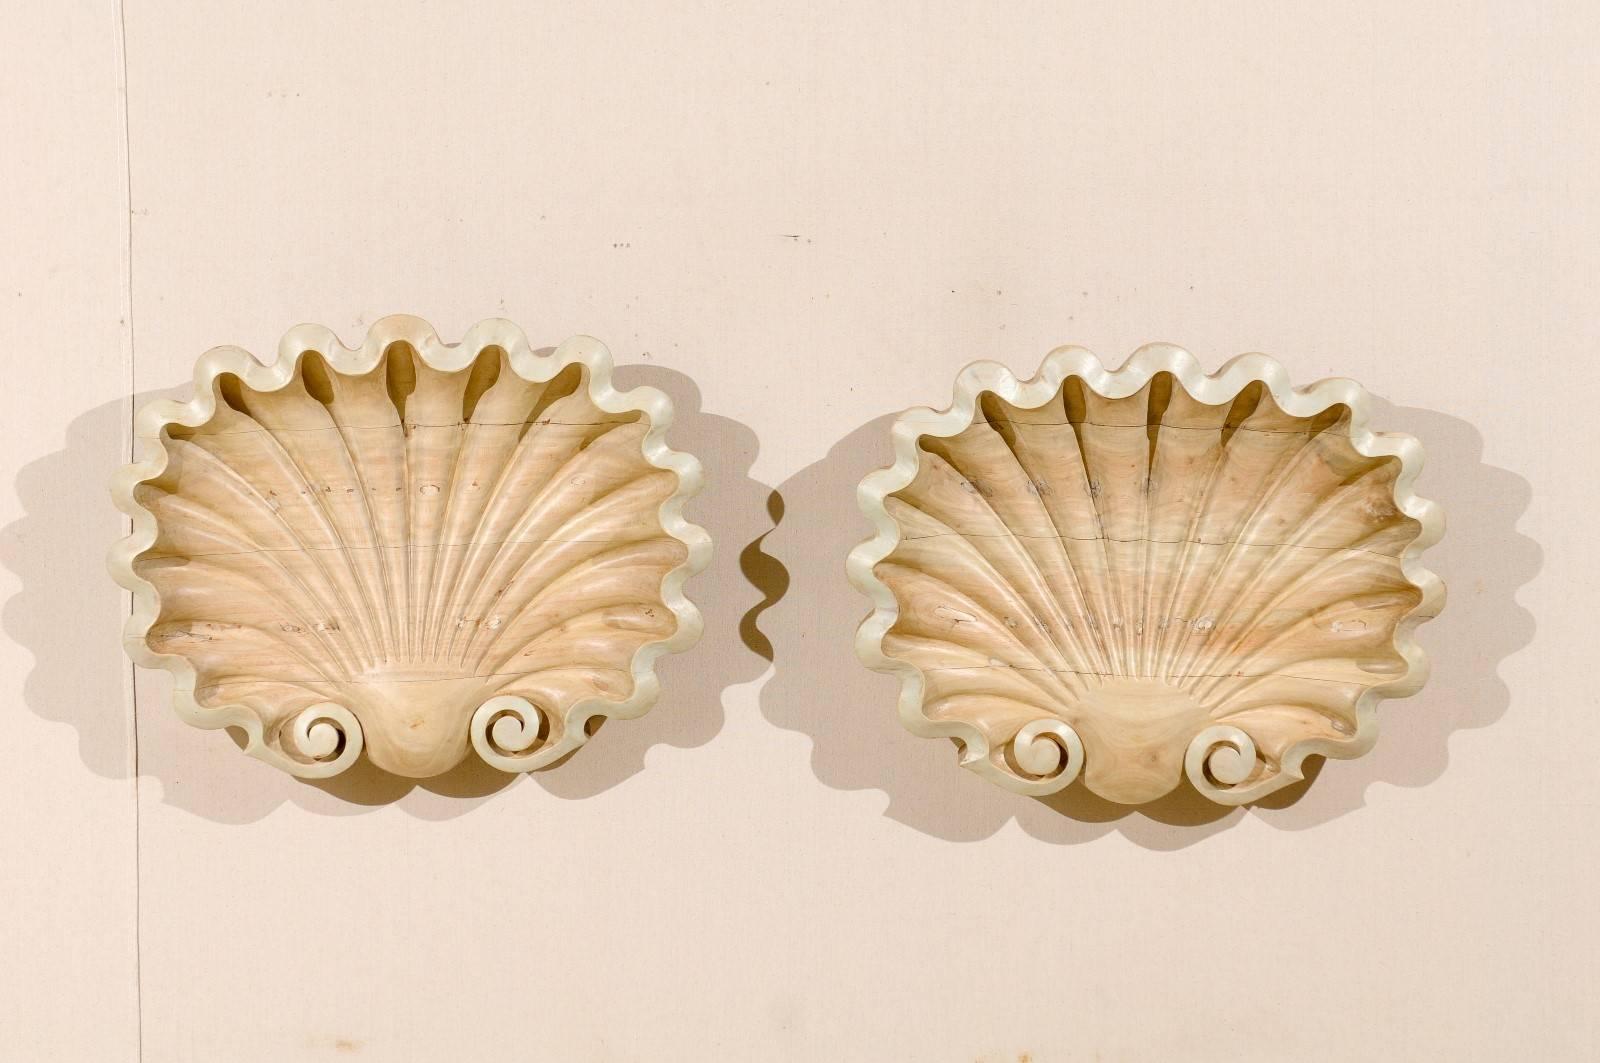 A carved, bleached and painted wood three dimensional shell plaque. These shell wall plaques would add a touch of antique classicism / Renaissance look to any room. The wood has been bleached to create the pretty soft tan color. These shells also